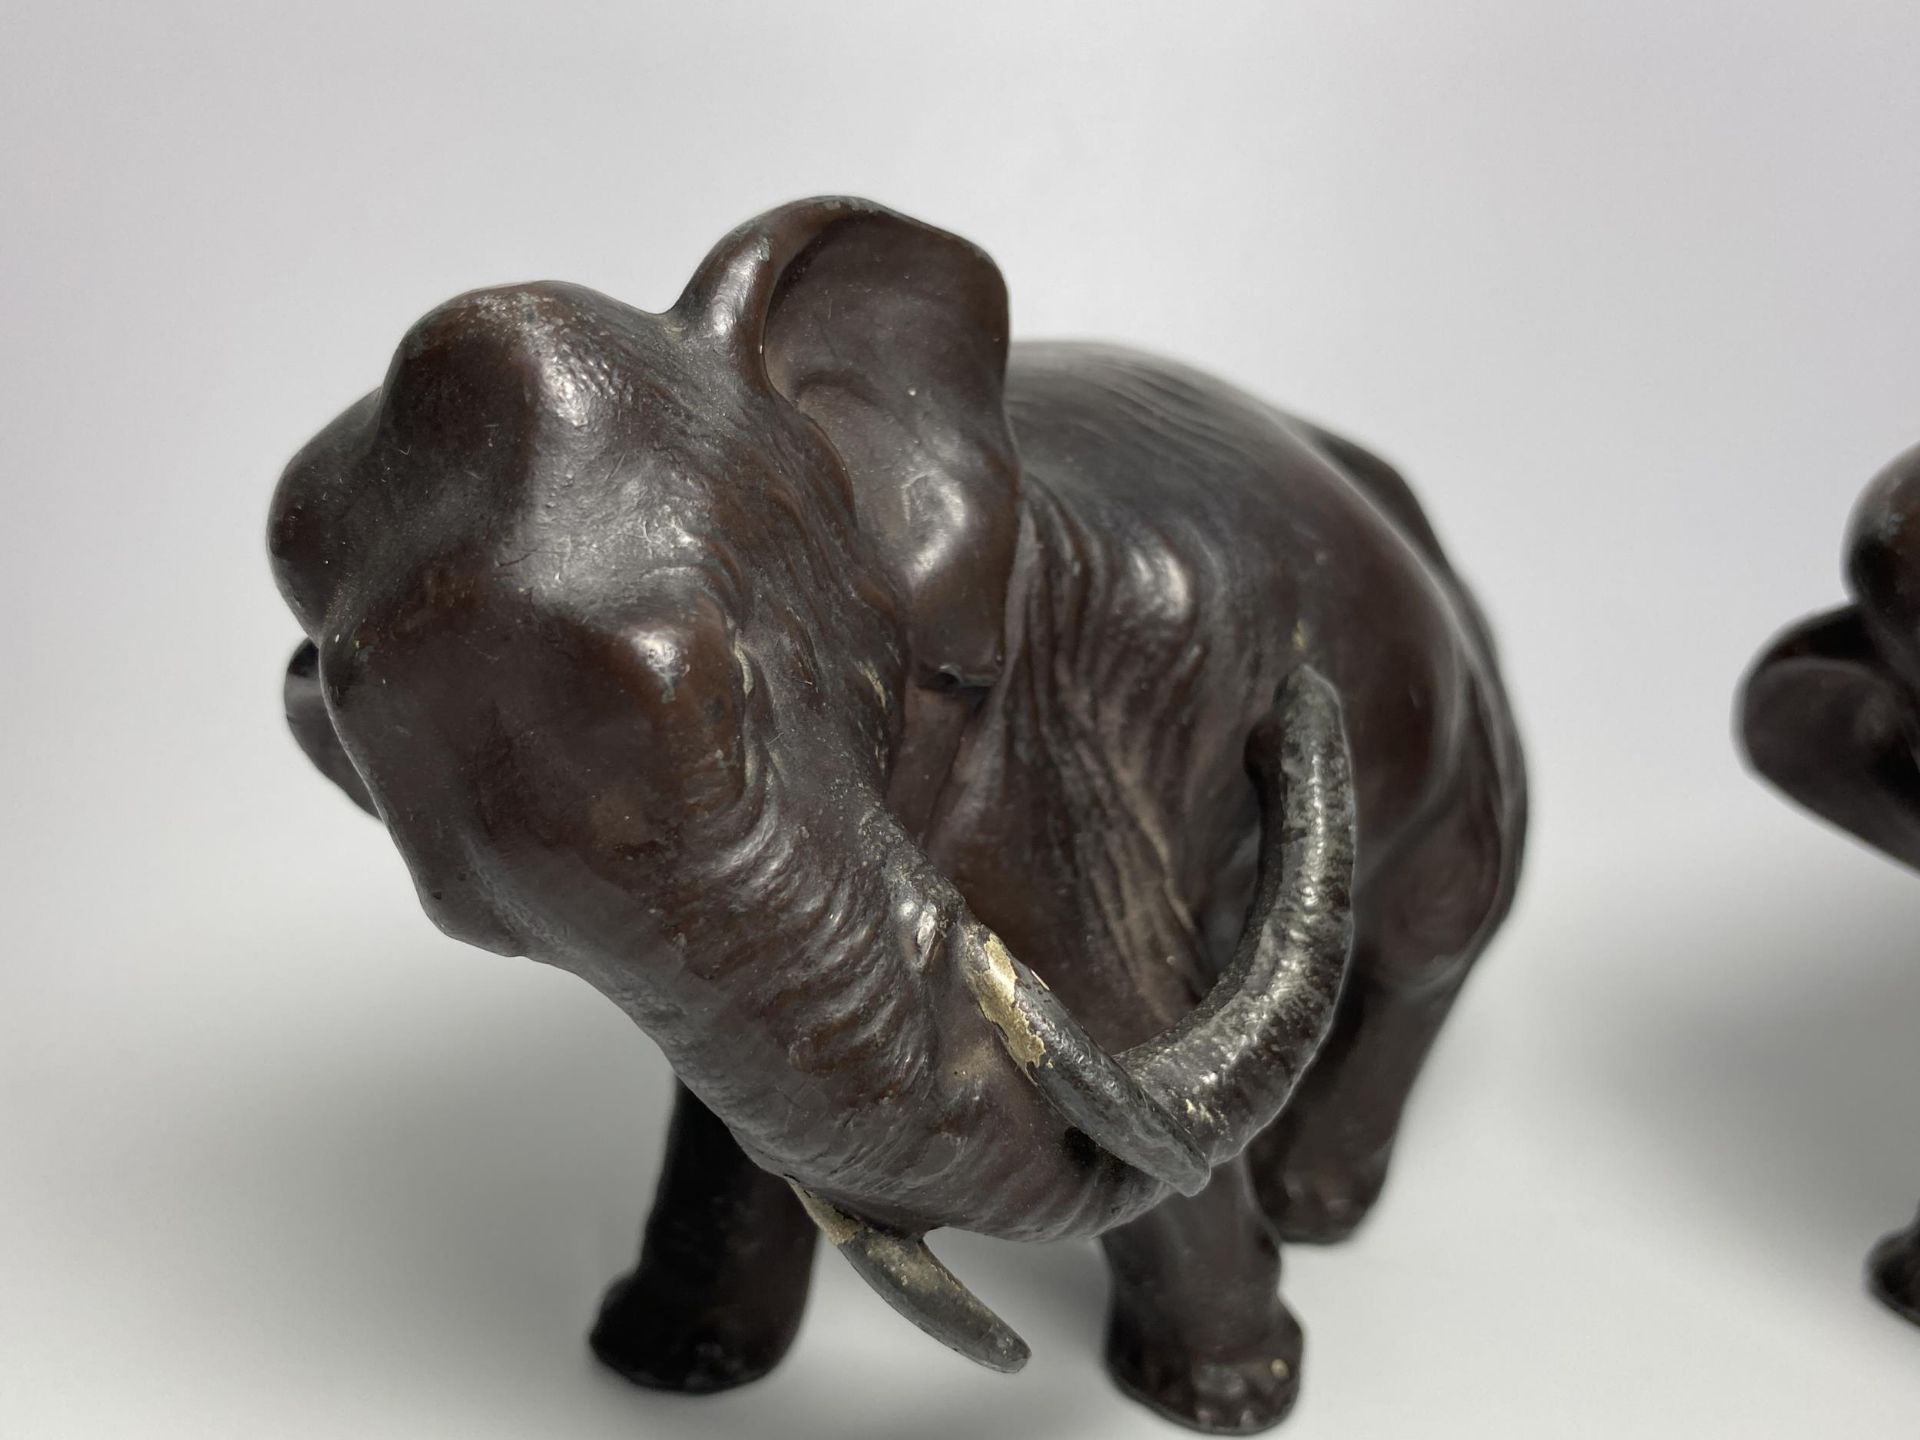 A PAIR OF EARLY 20TH CENTURY JAPANESE METAL MODELS OF ELEPHANTS, 10 X 14CM - Image 3 of 7